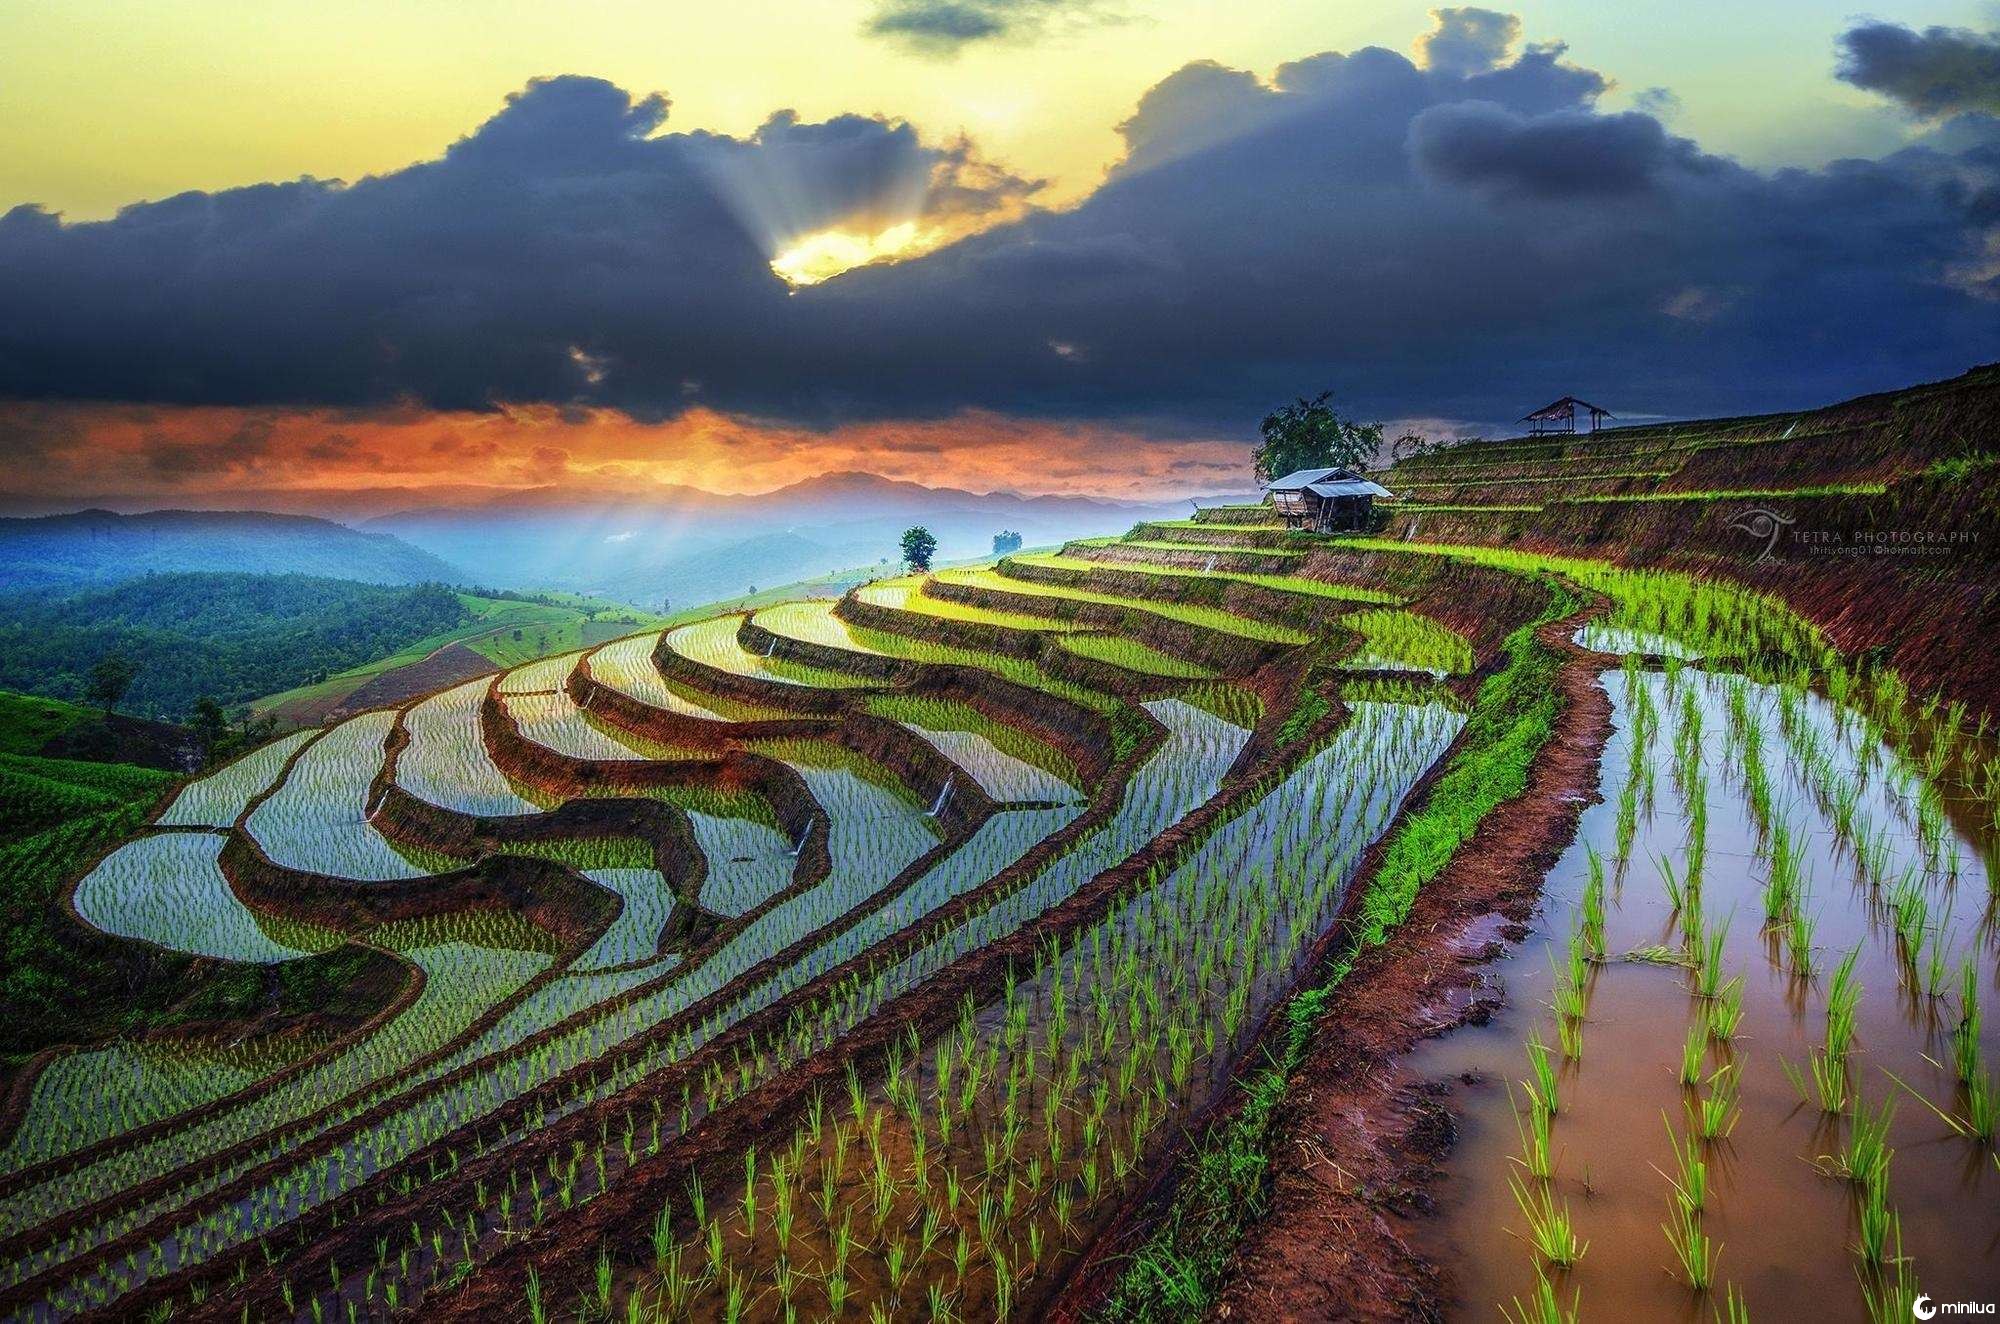 These Vietnamese rice paddies are terraced in such a way that they look almost like a natural formation.